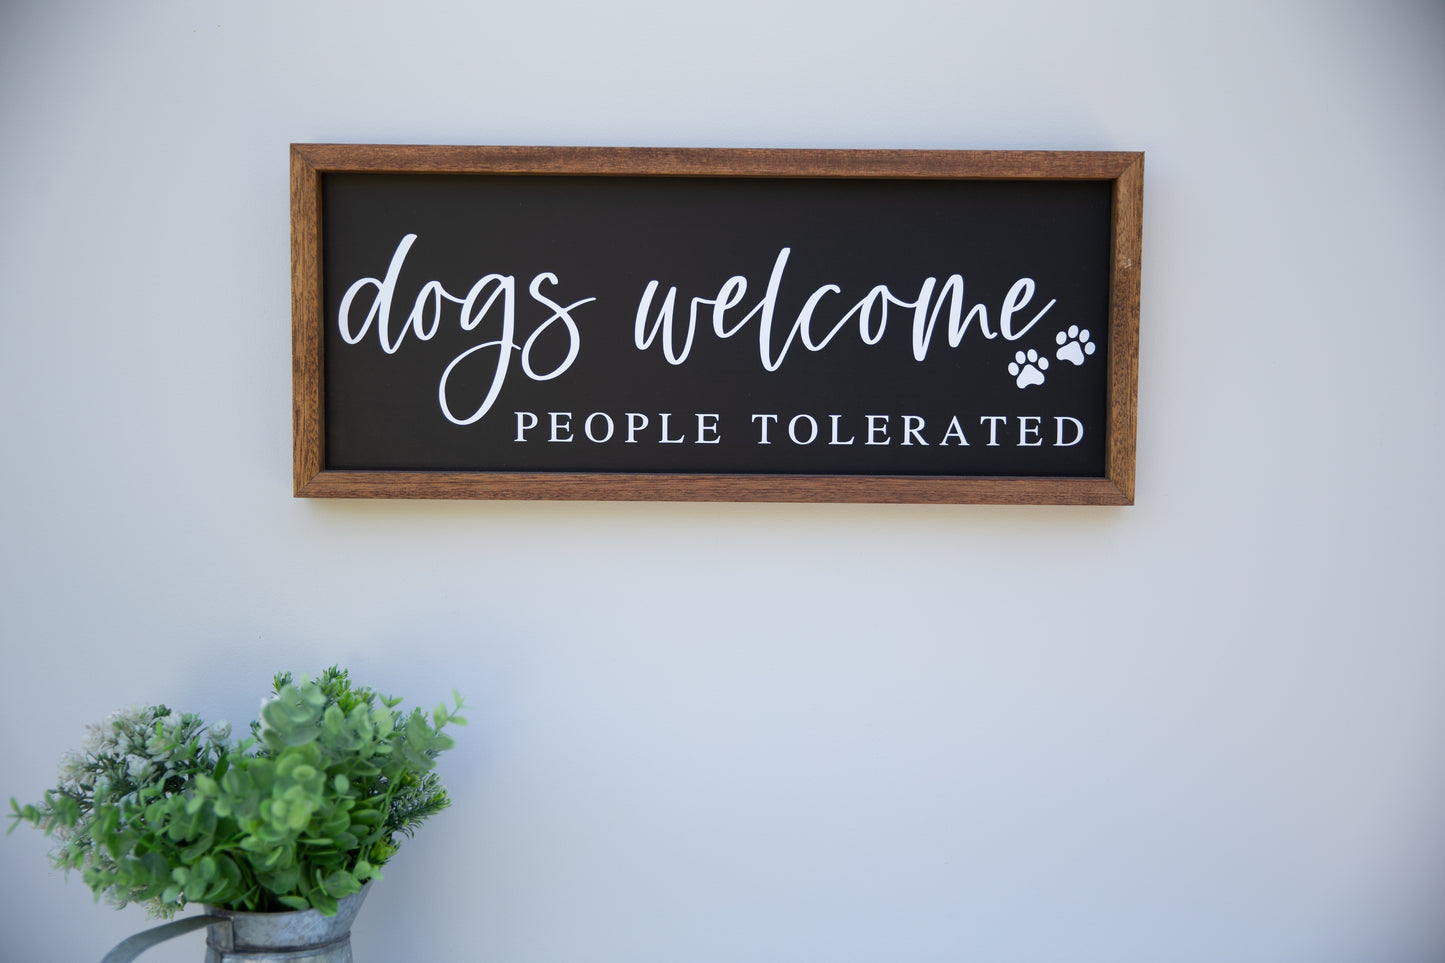 Dogs Welcome - People Tolerated